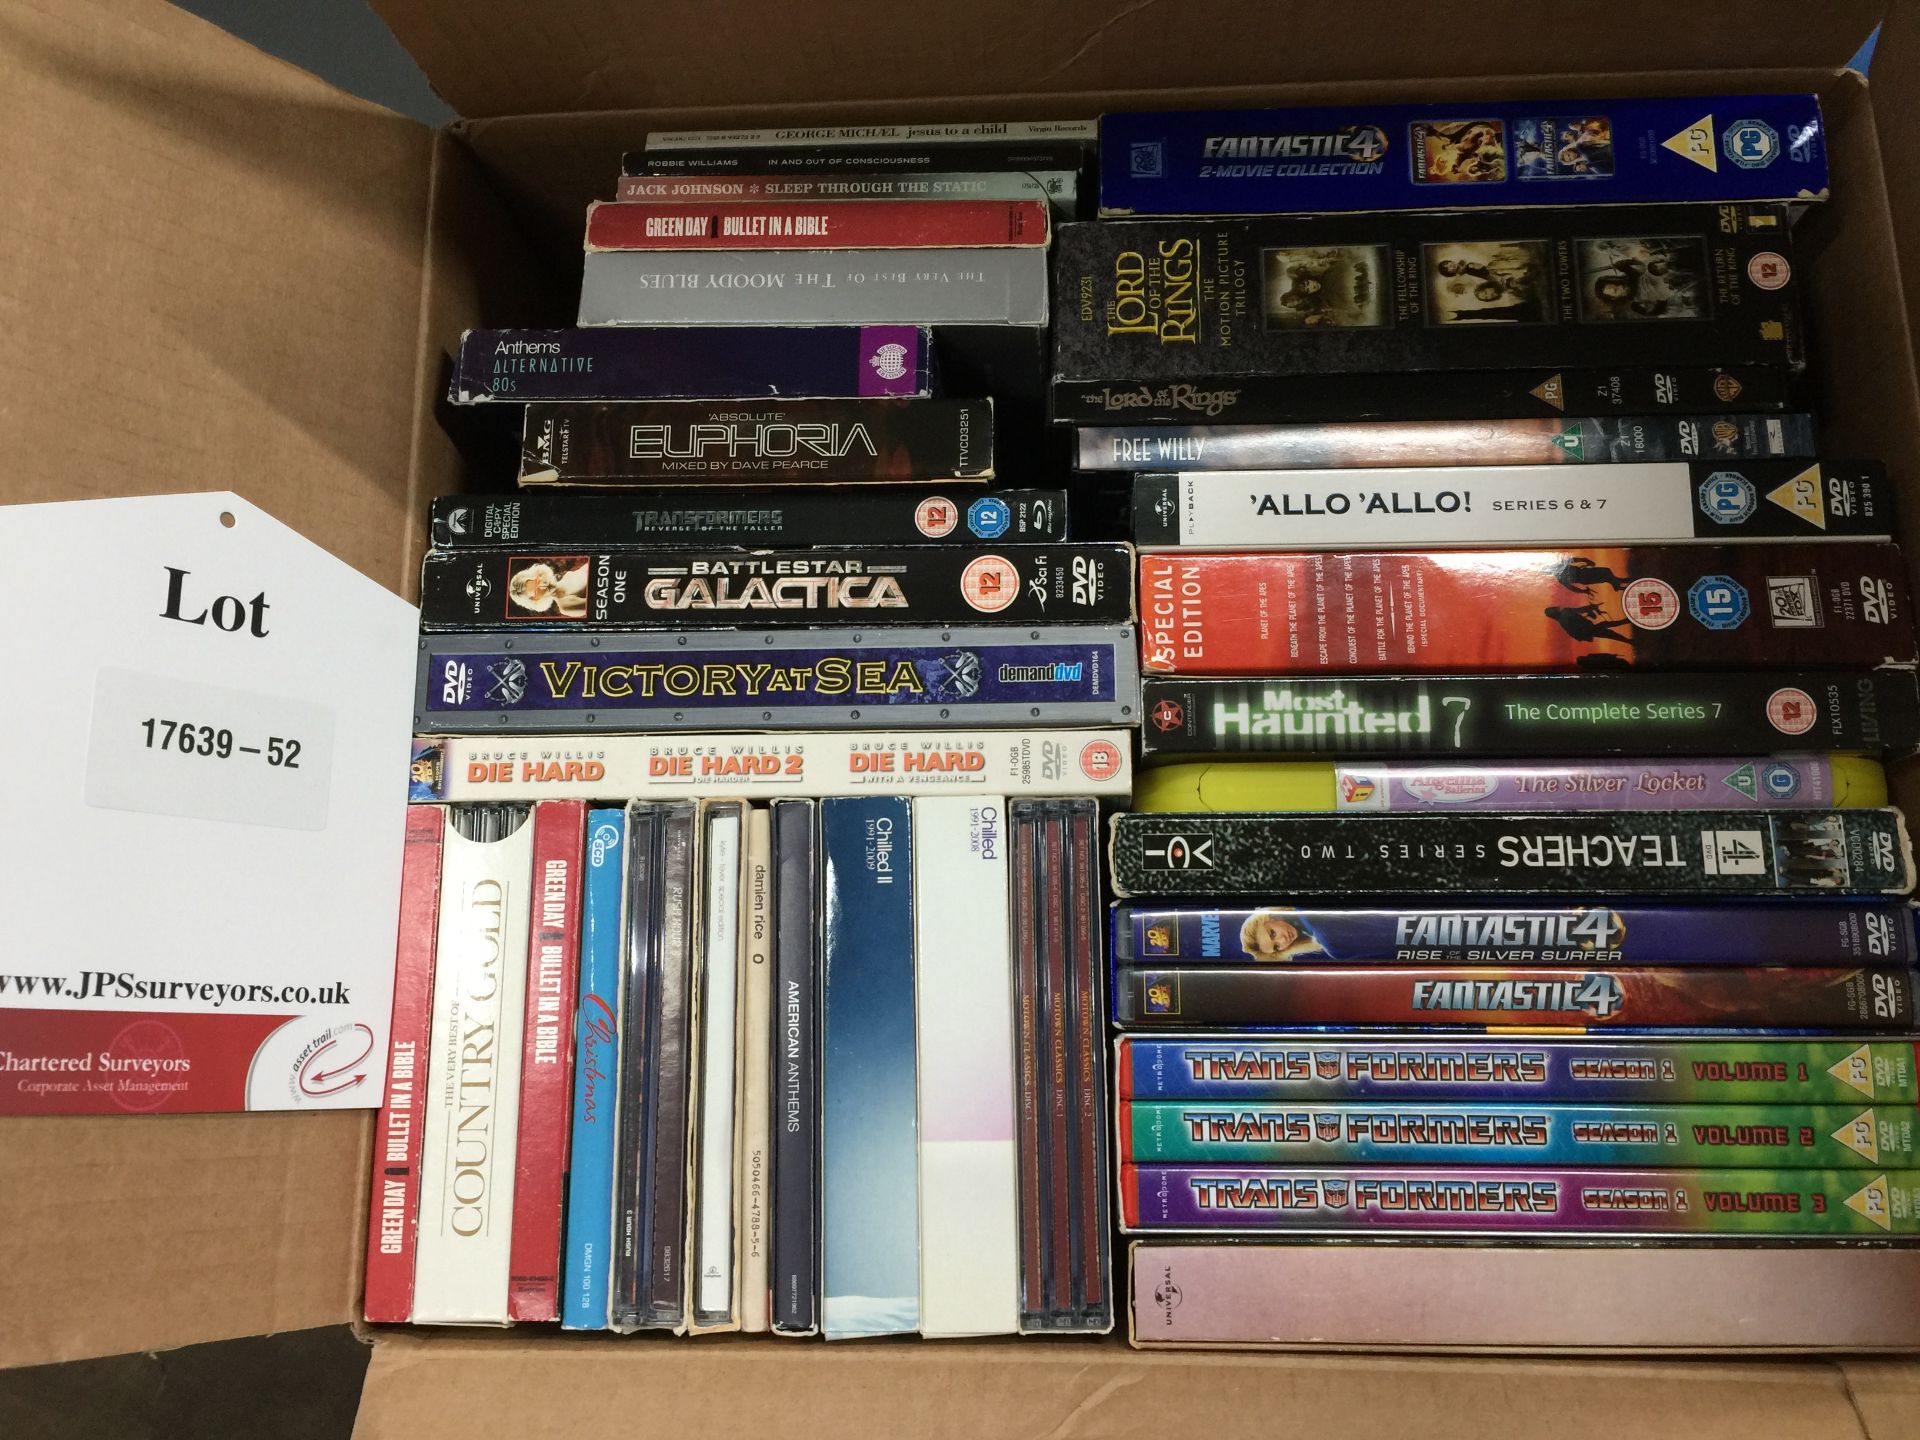 200 x Various DVD/TV Shows - USED - Untested - Please see images for items